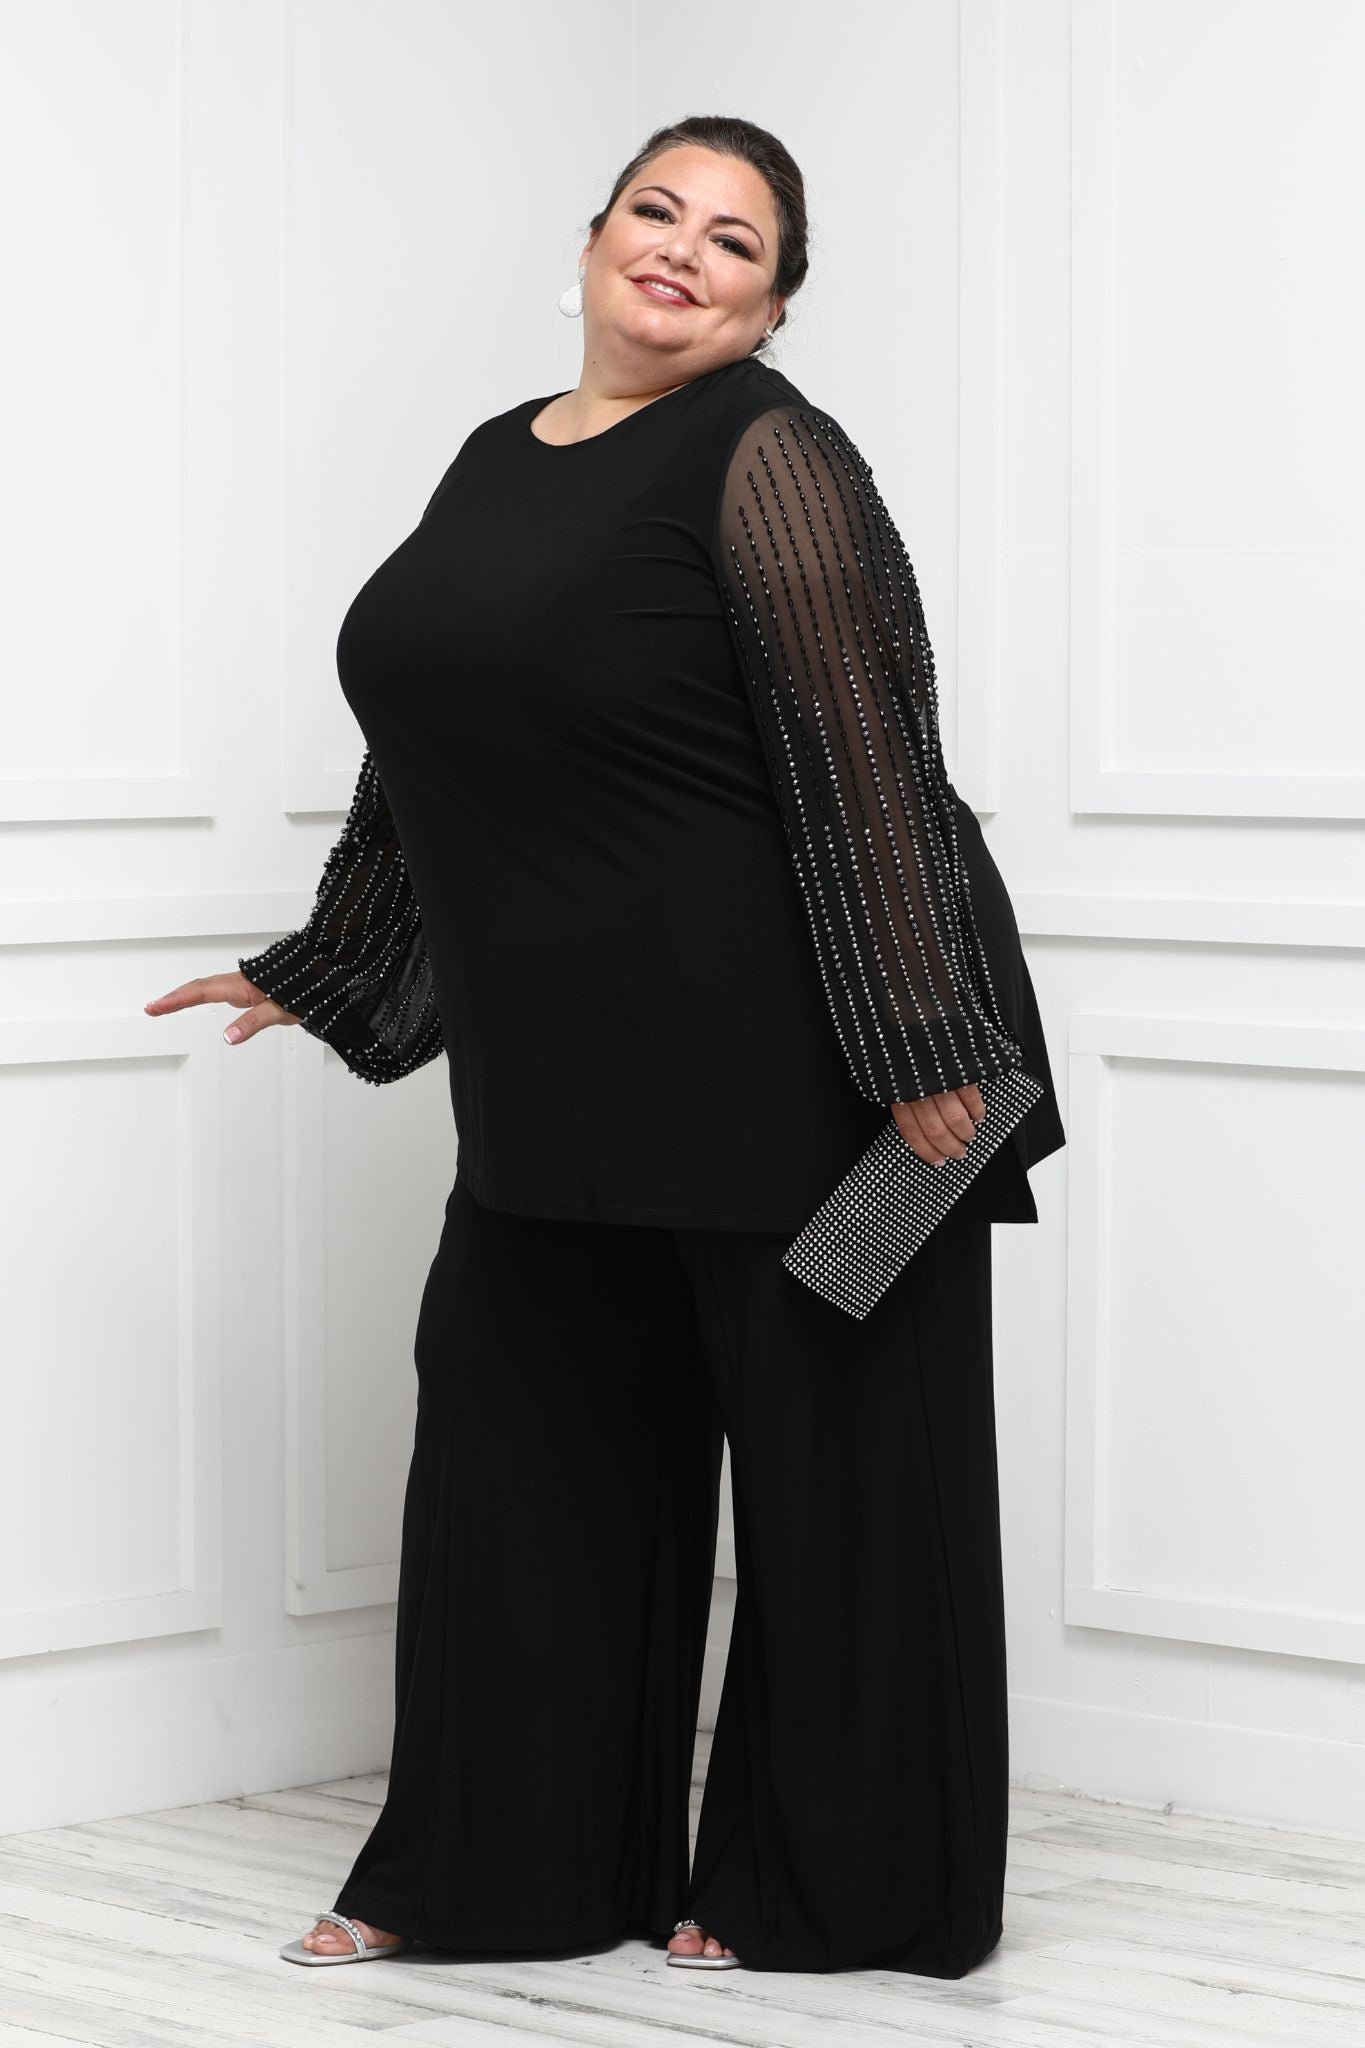 Trouser Plus Size Clothing For Women